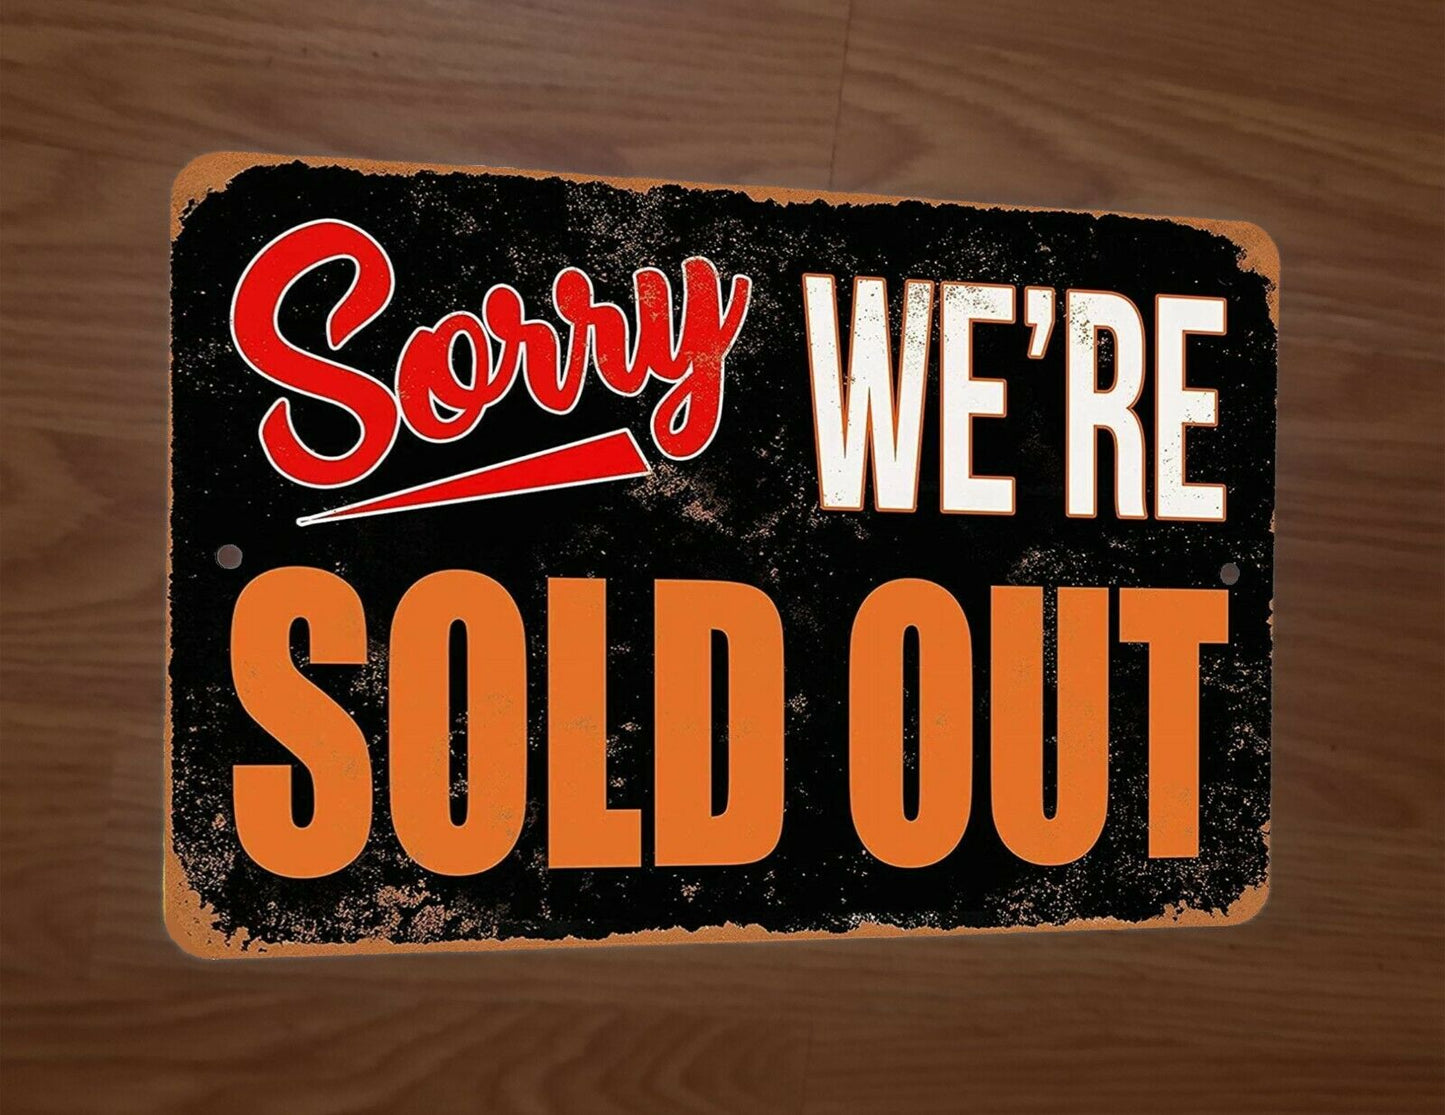 Vintage Sorry Were Sold Out 8x12 Metal Wall Sign